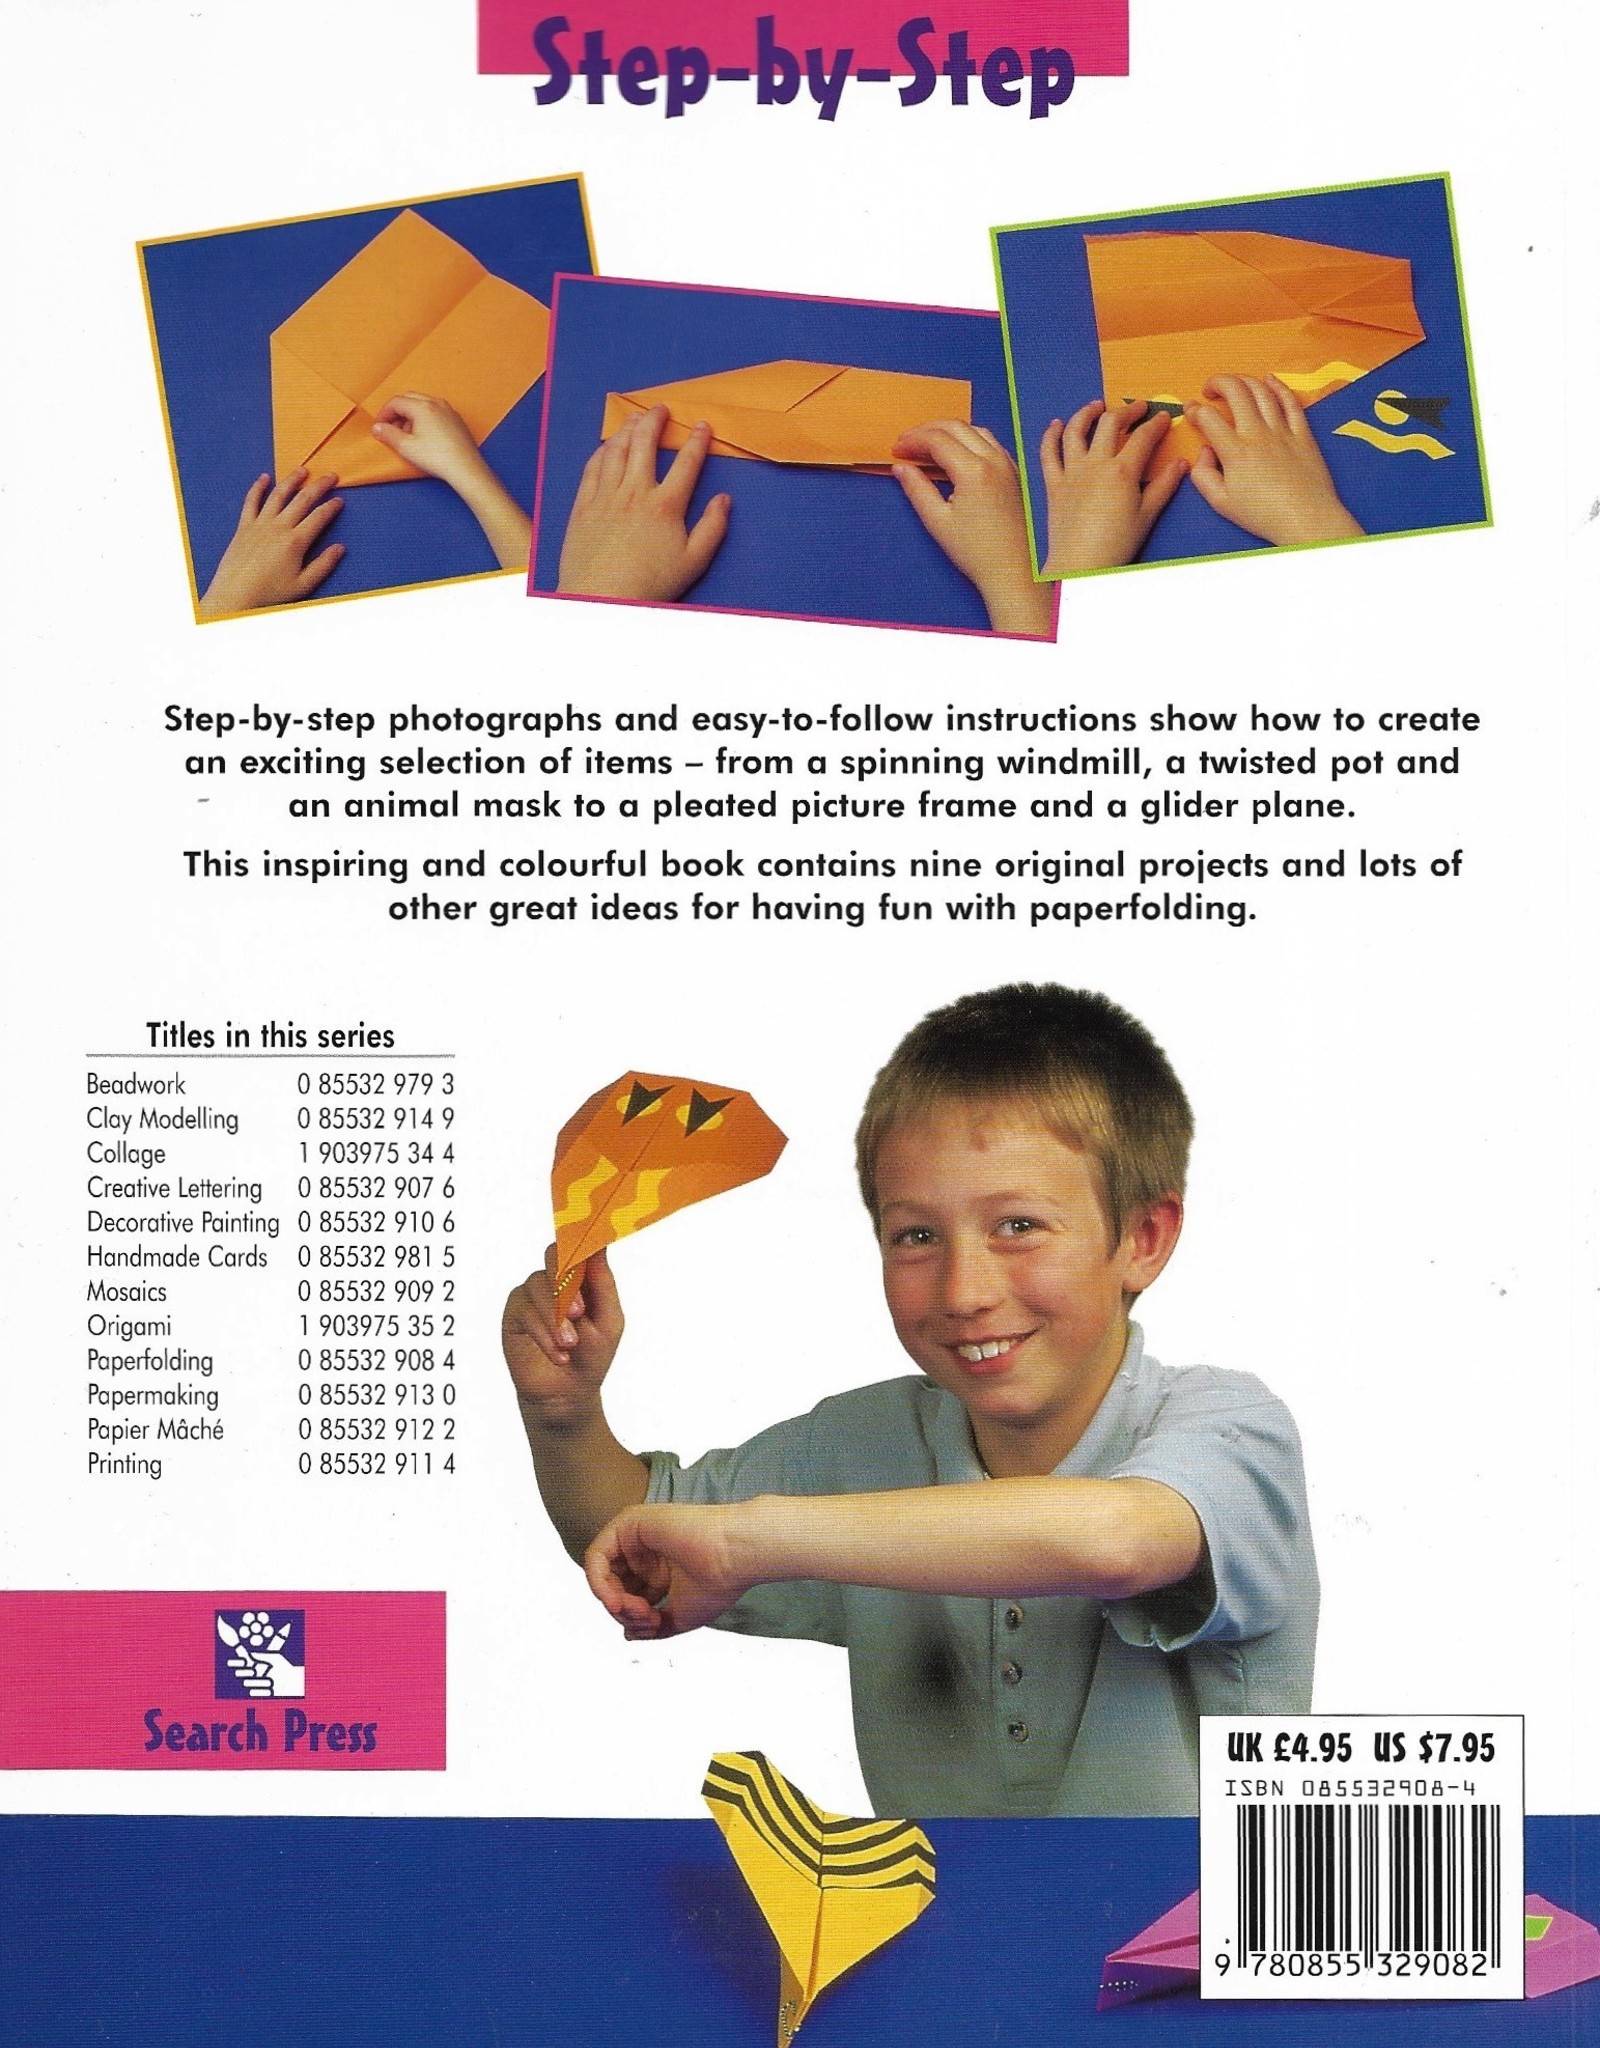 Paperfolding Step-by-Step, 32 Pages, Soft Back Book